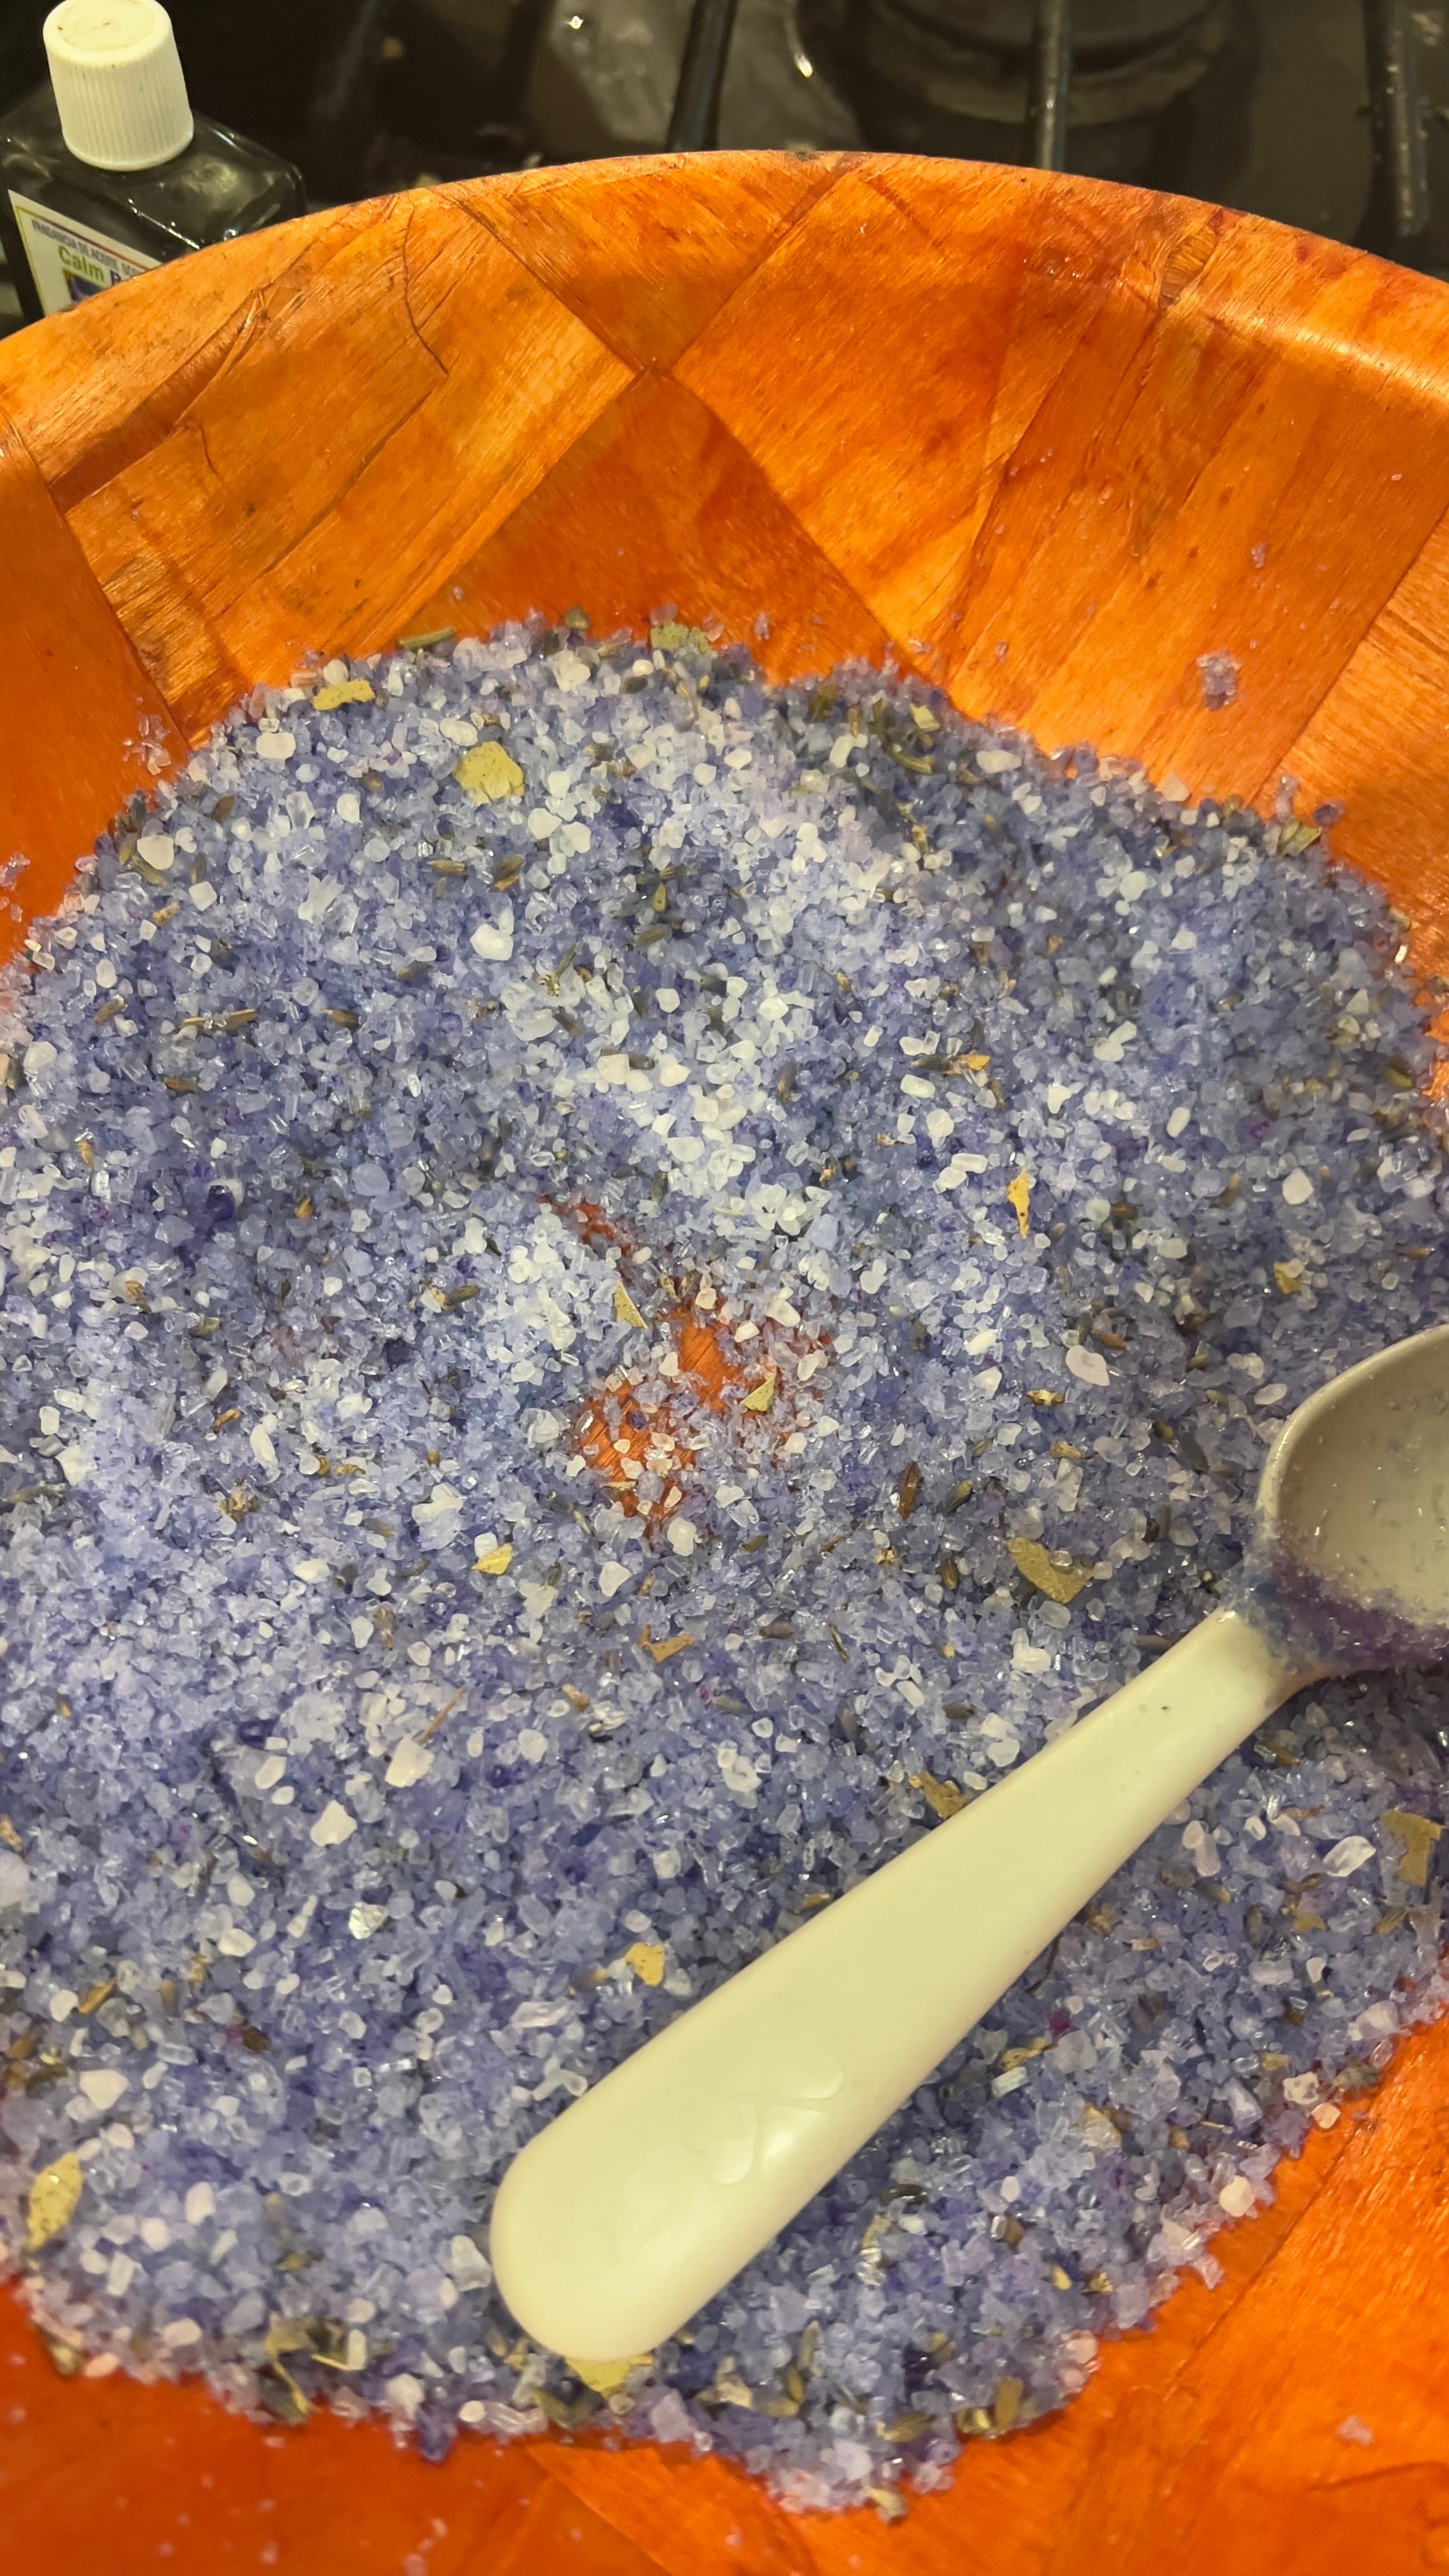 Empath Spell Bath Salt Potion - Your Gateway to Healing, Relaxation, and Emotional Harmony